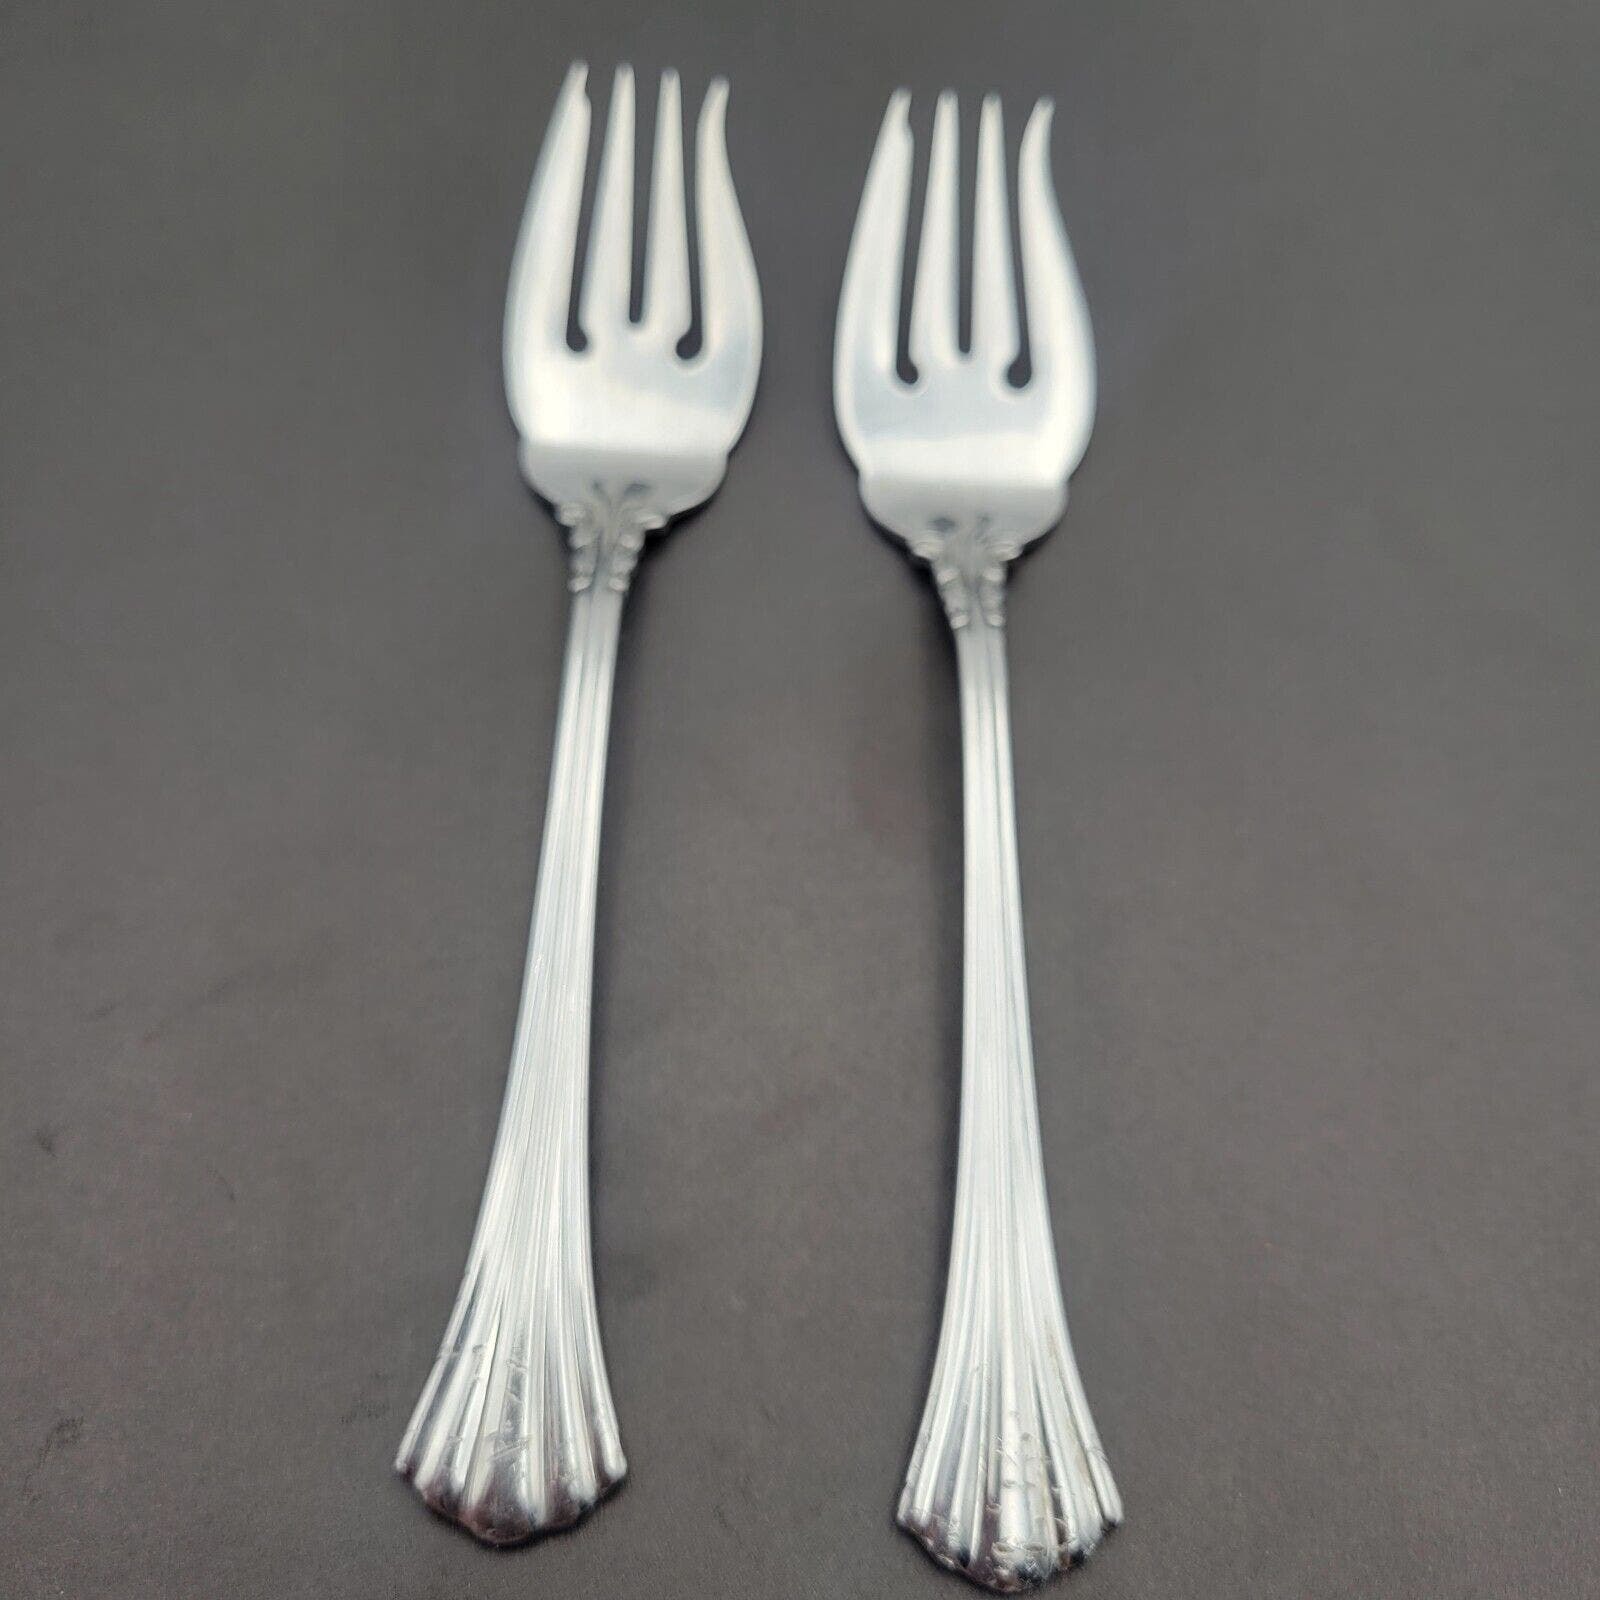 Primary image for Reed Barton 1800 Stainless 18/8 Salad Forks 6 1/2” Korea Set of 2